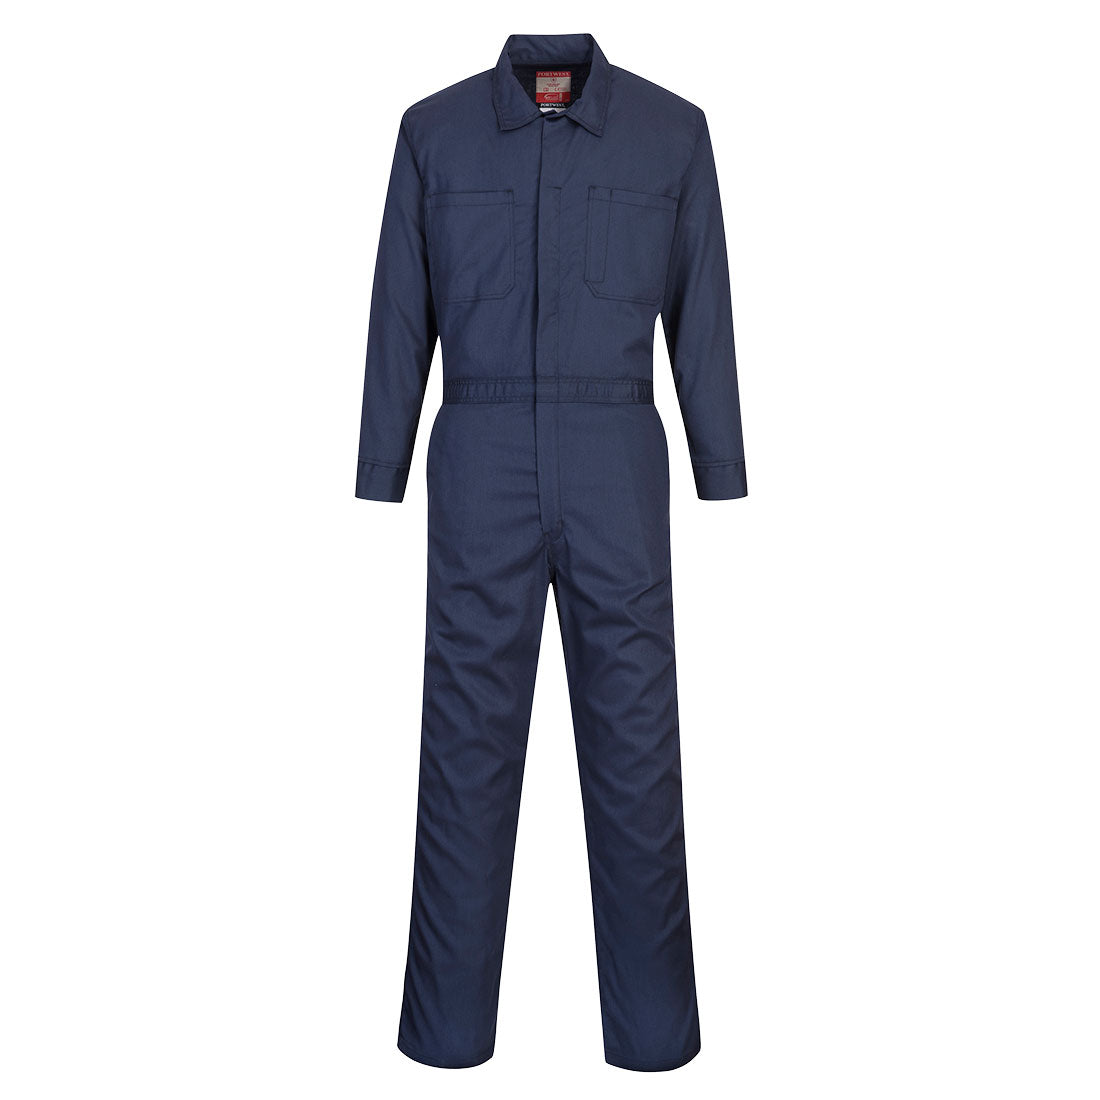 Bizflame 88/12 Classic FR Coverall- XL NAVY